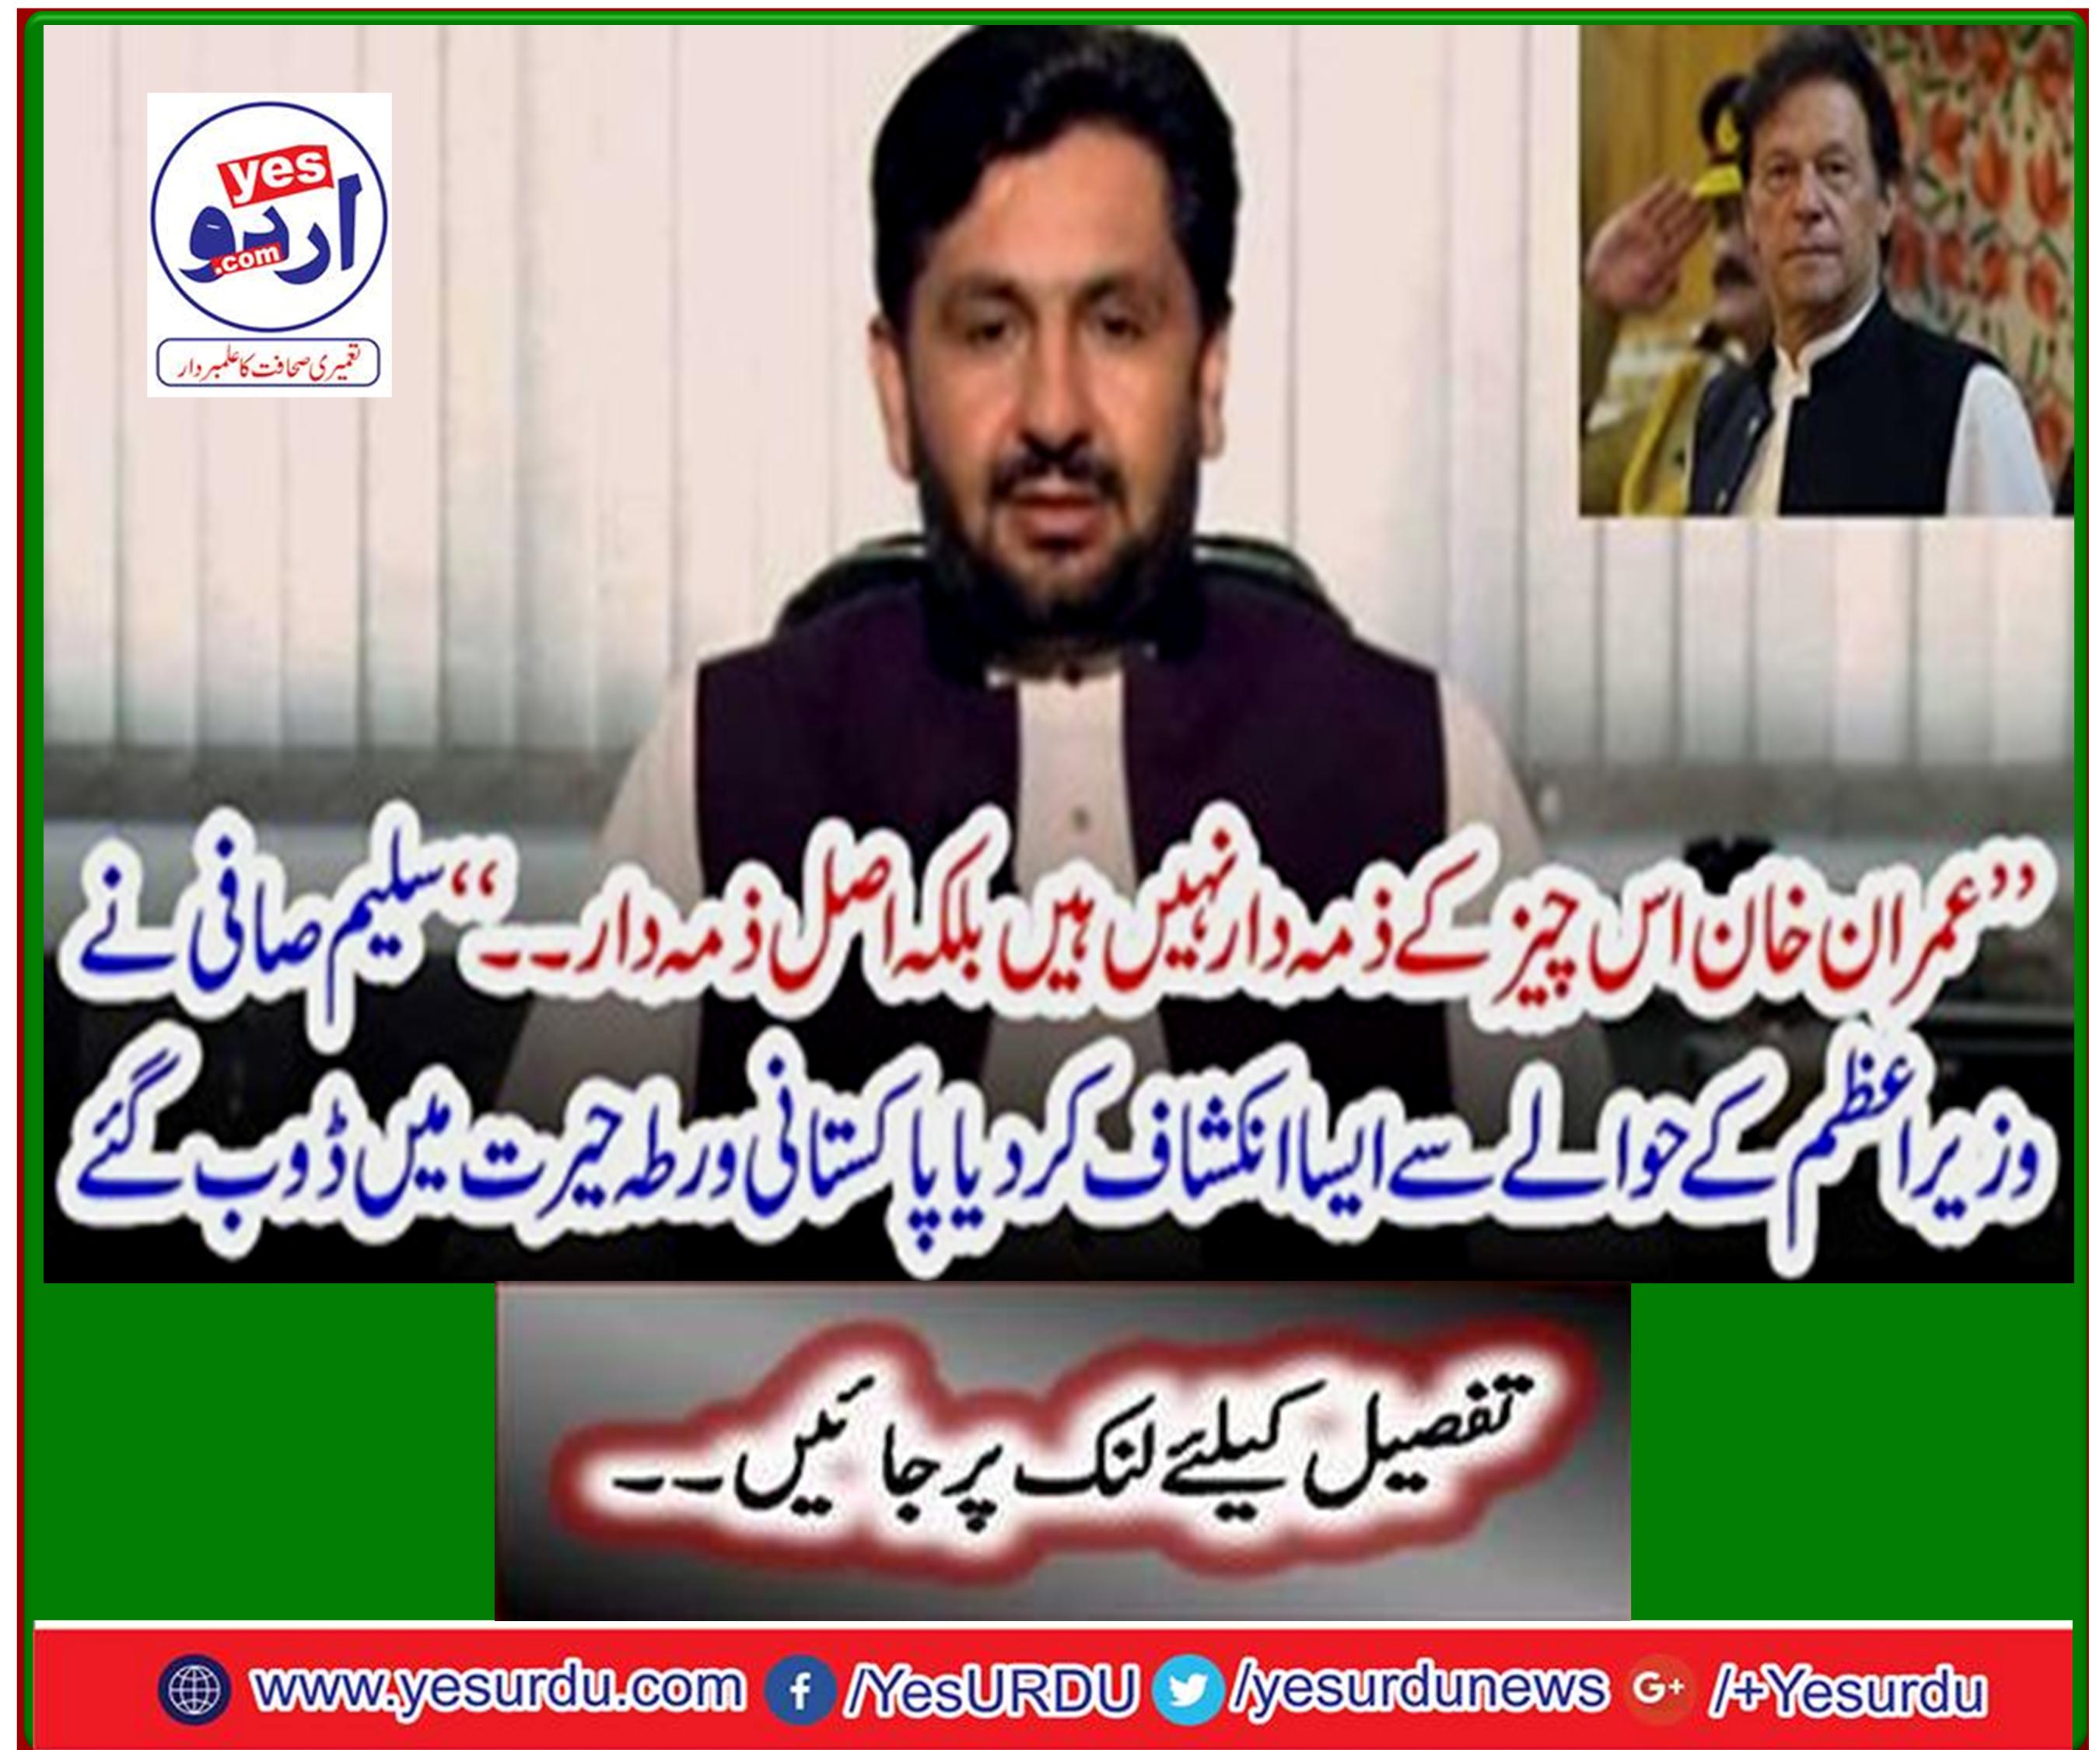 'Saleem Safi reveals to the Prime Minister that the Pakistani side is shocked